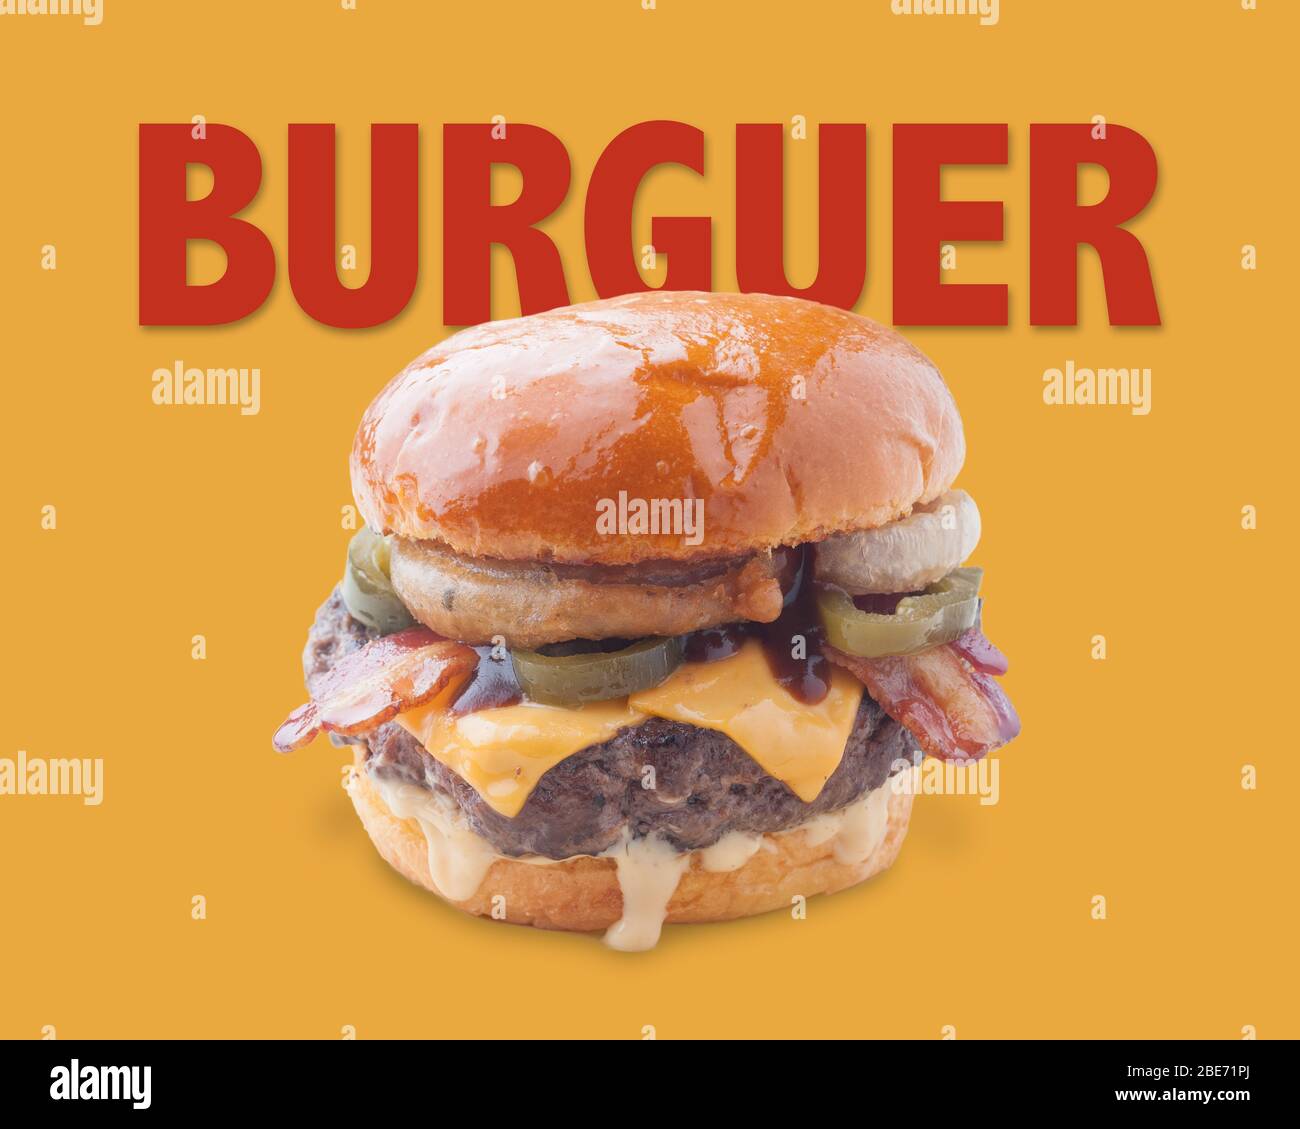 hamburger applied to notice design or promotional sign Stock Photo